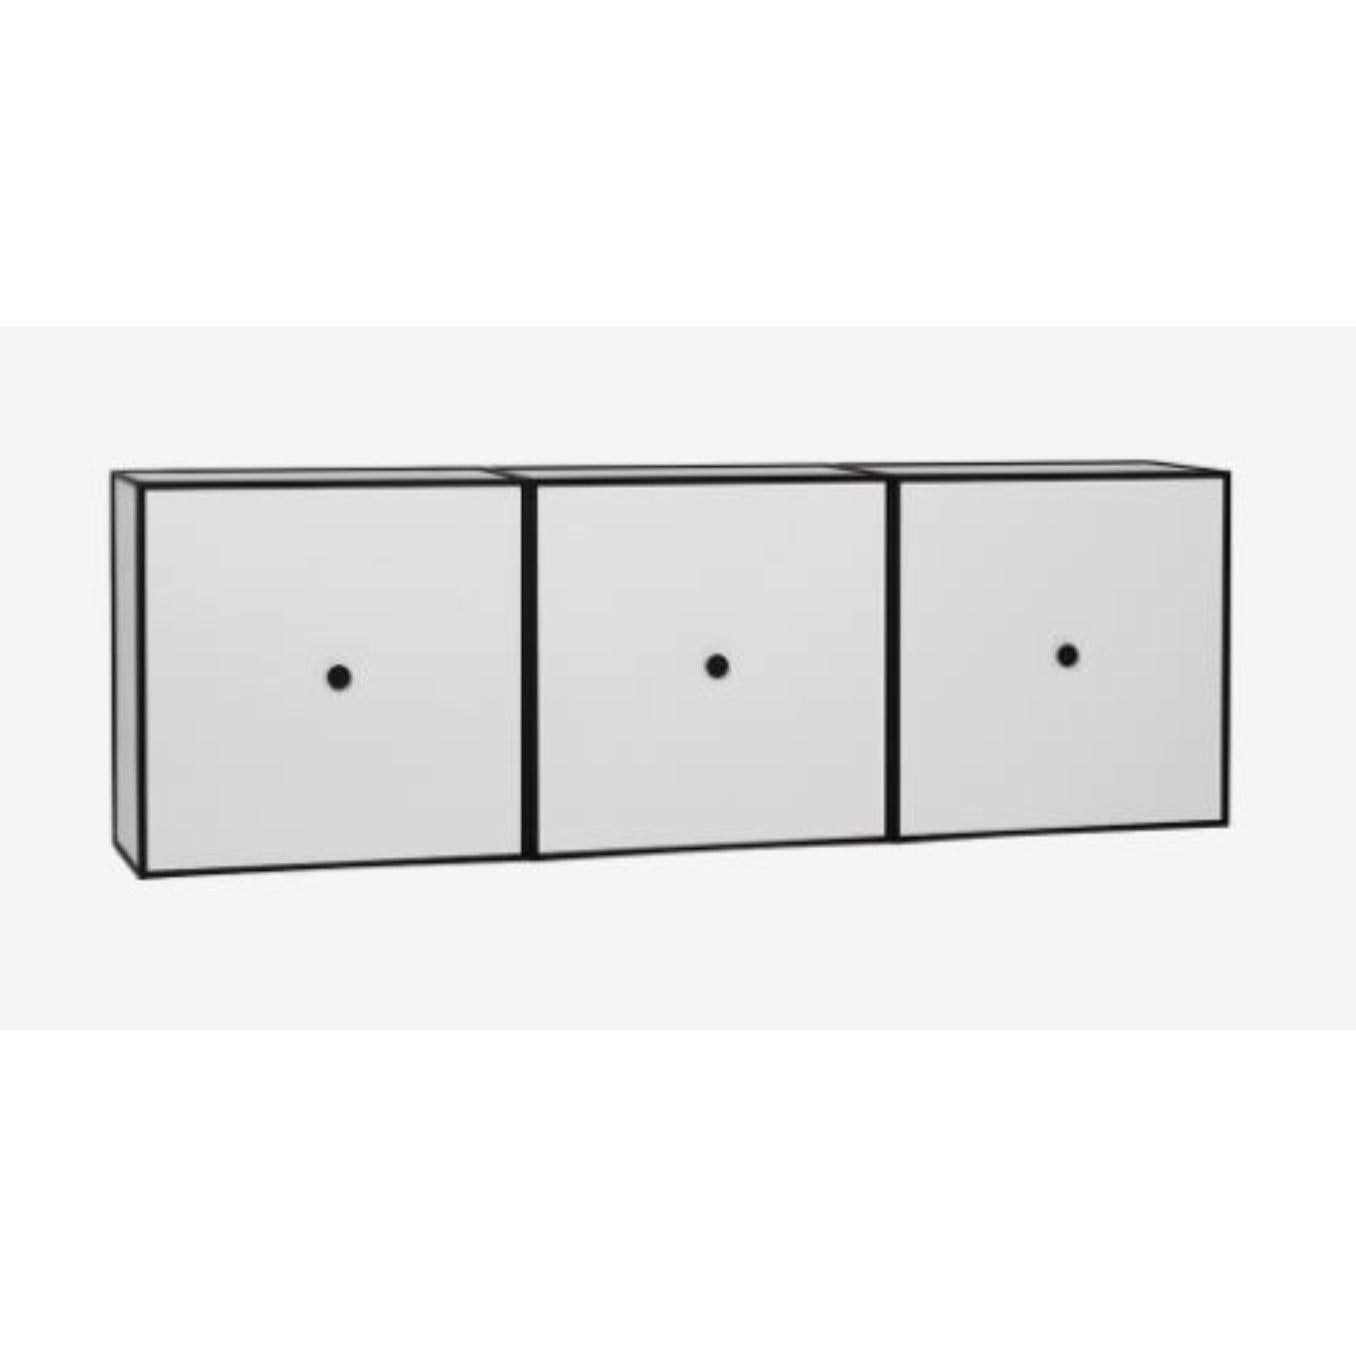 42 light grey frame view box by Lassen
Dimensions: D 126 x W 21 x H 42 cm 
Materials: Finér, Melamin, Melamine, Metal, Veneer
Also available in different colours and dimensions. 
Weight: 22.80 Kg

By Lassen is a Danish design brand focused on